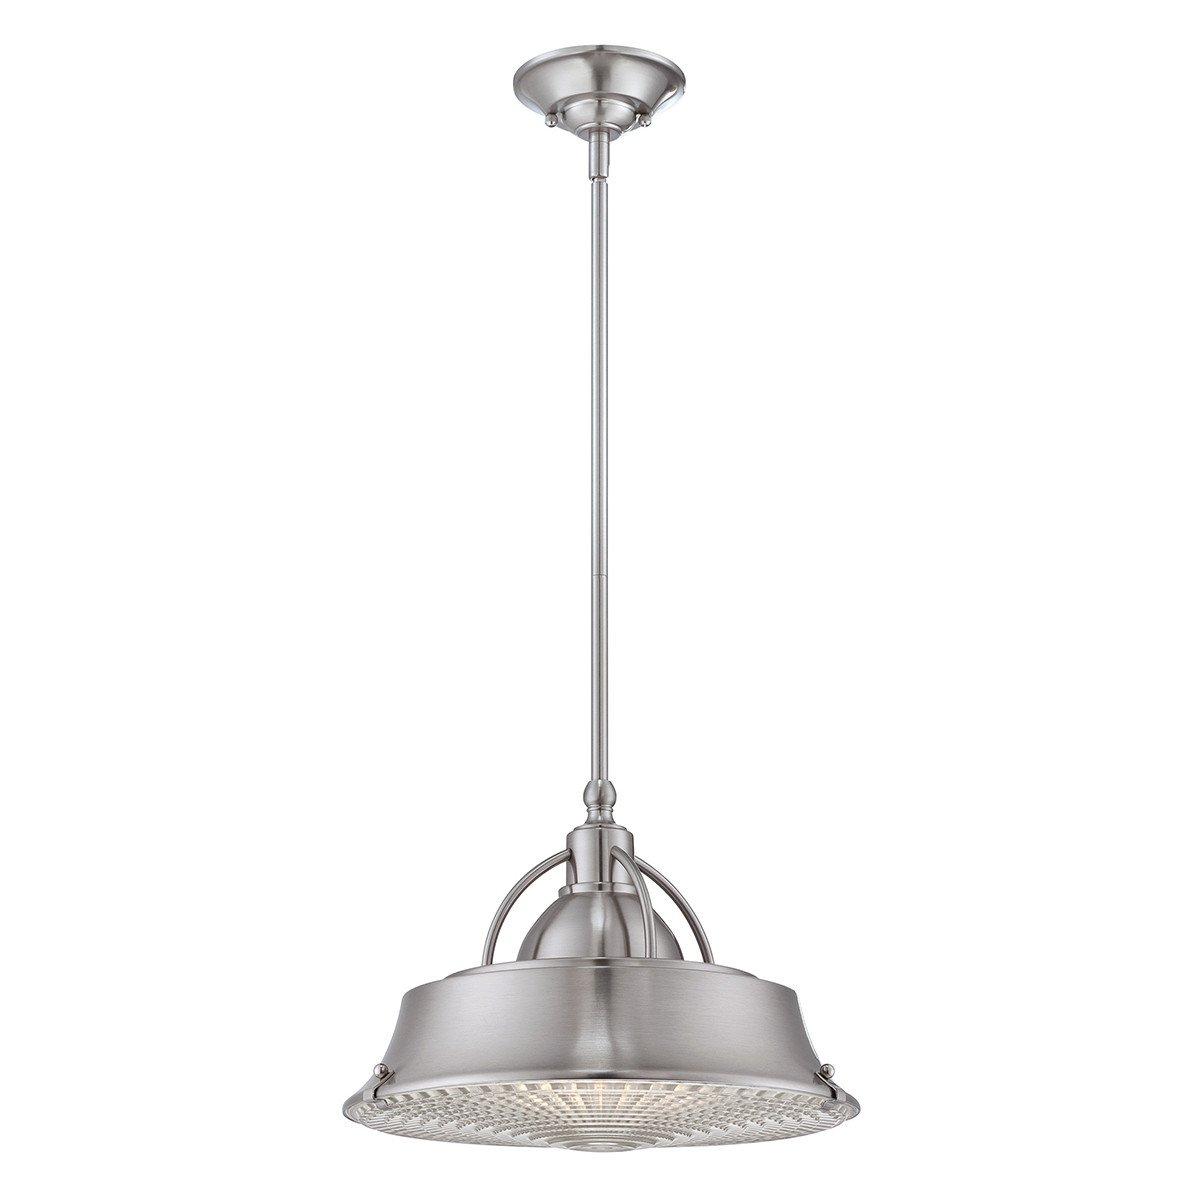 Cody 2 Light Dome Ceiling Pendant Brushed Nickel E27